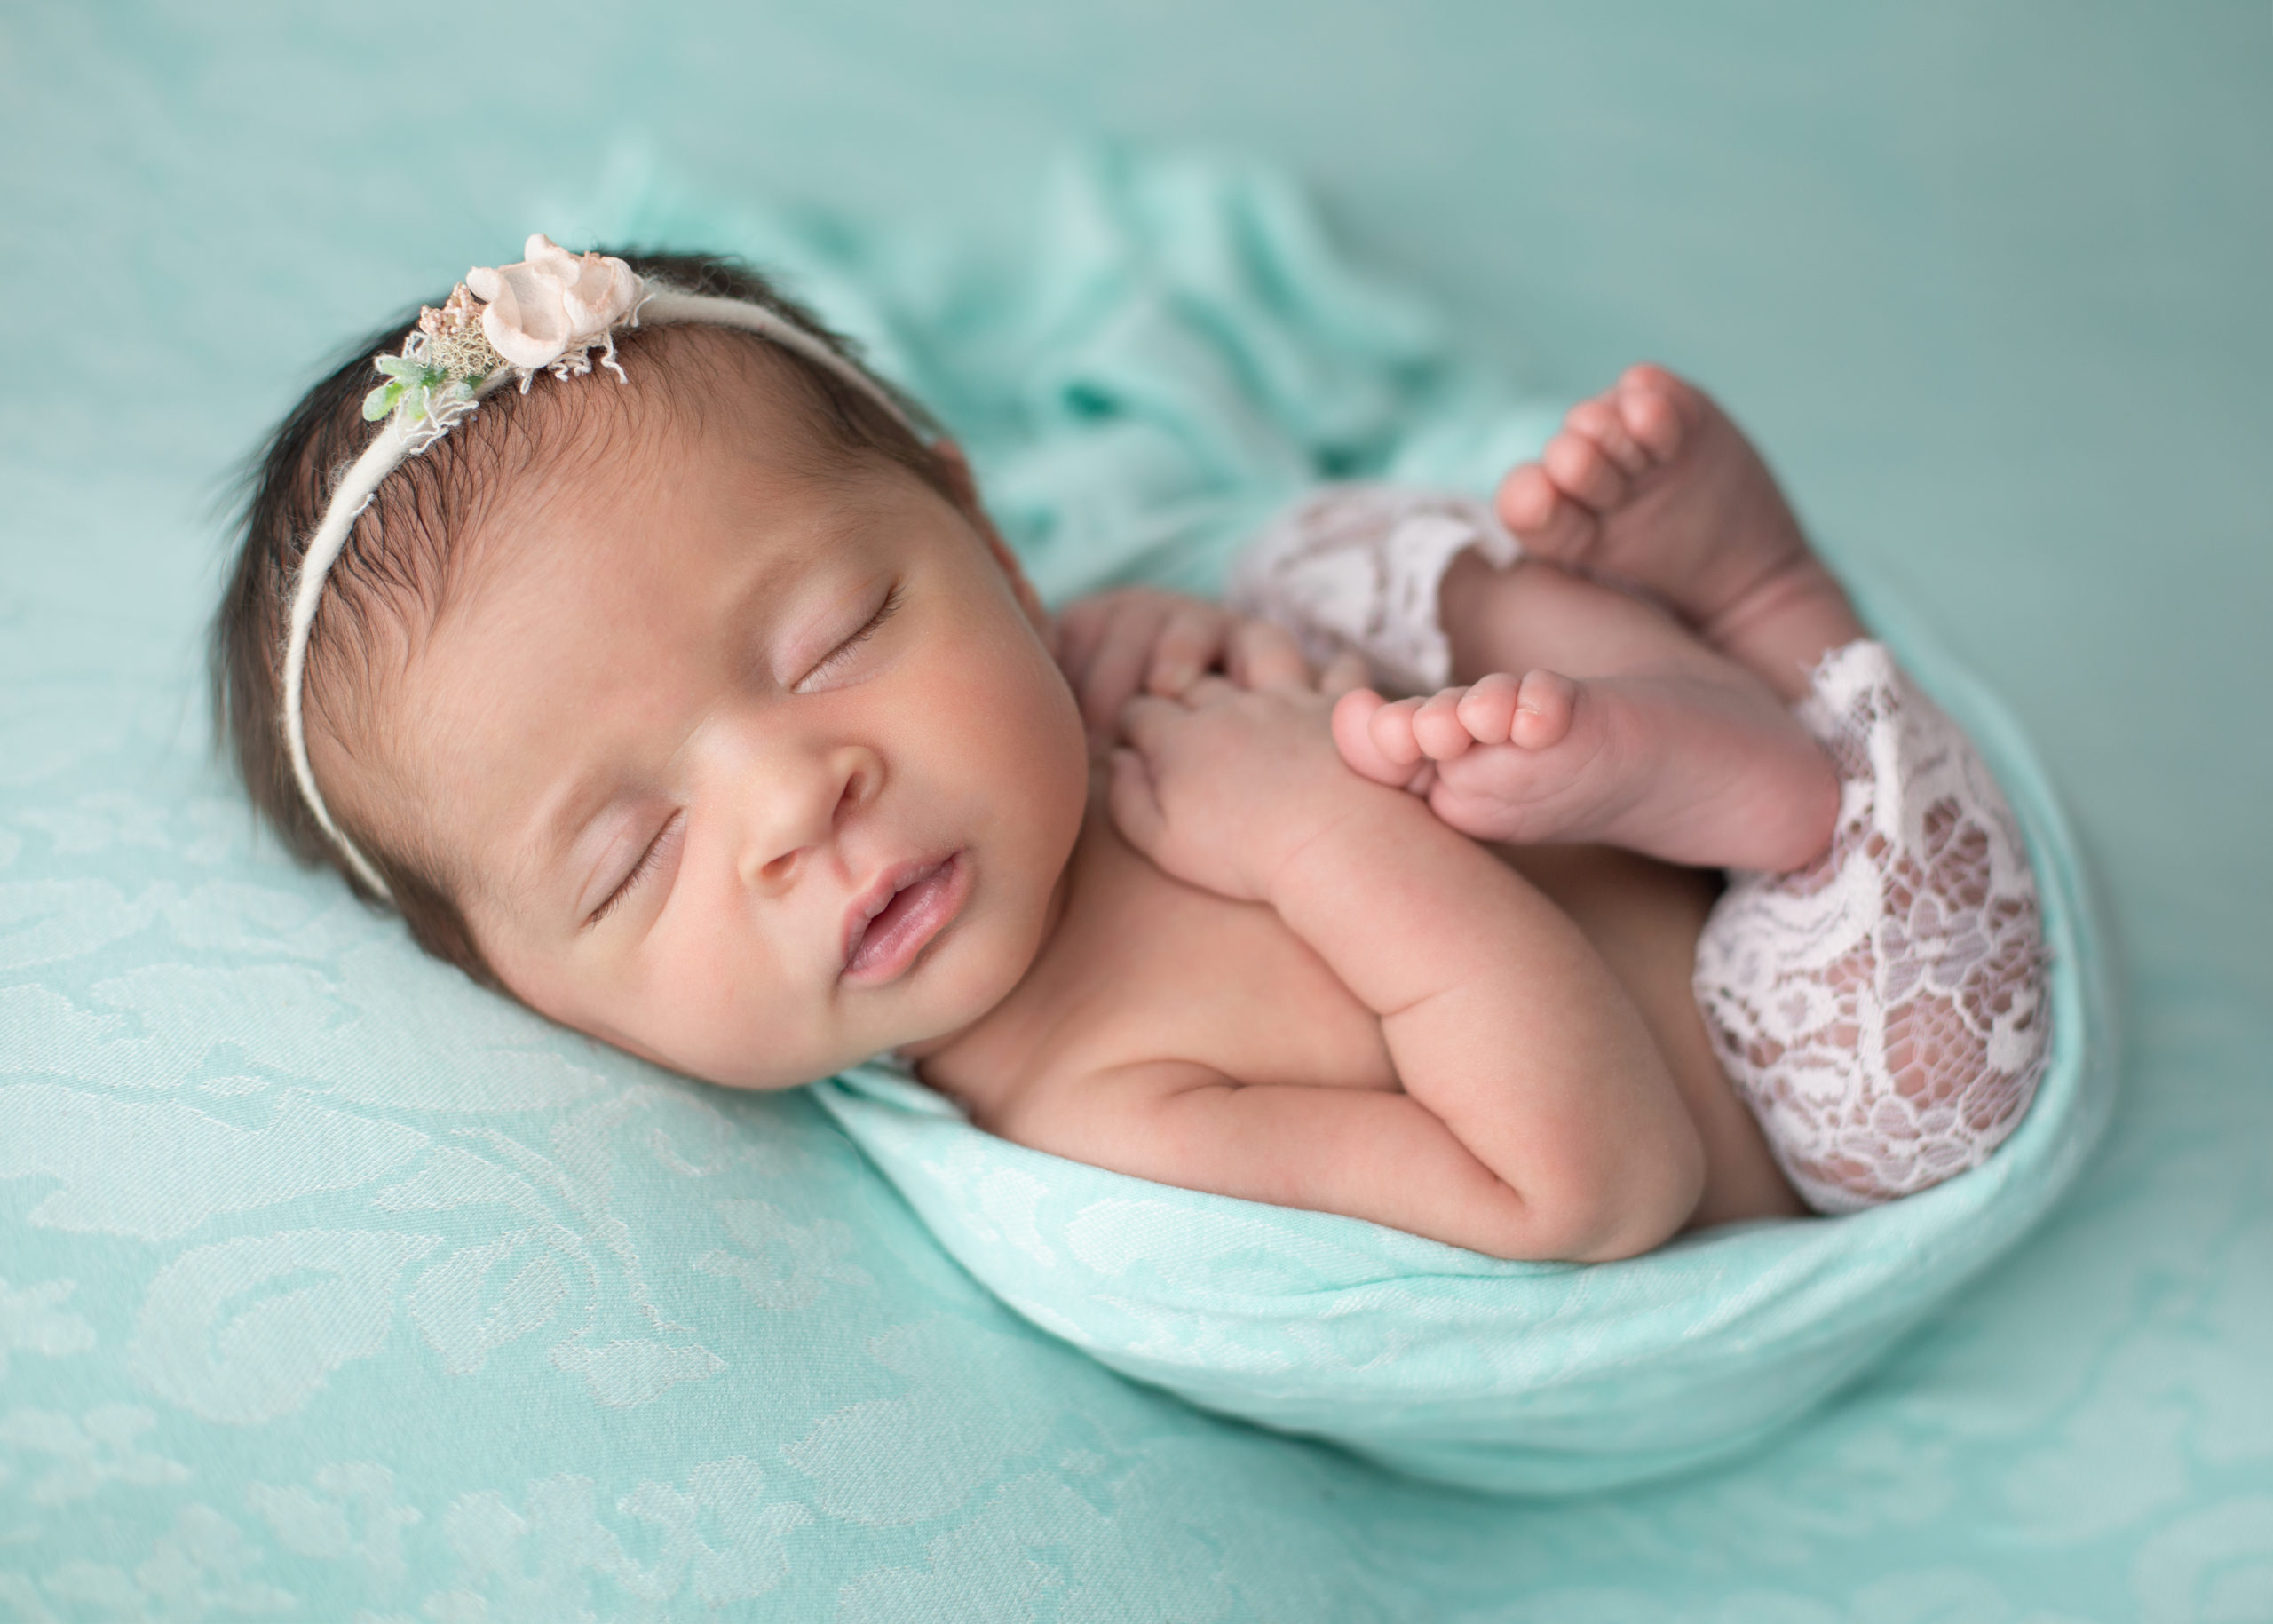 Newborn baby wrapped in a teal blanket on a teal floral blanket